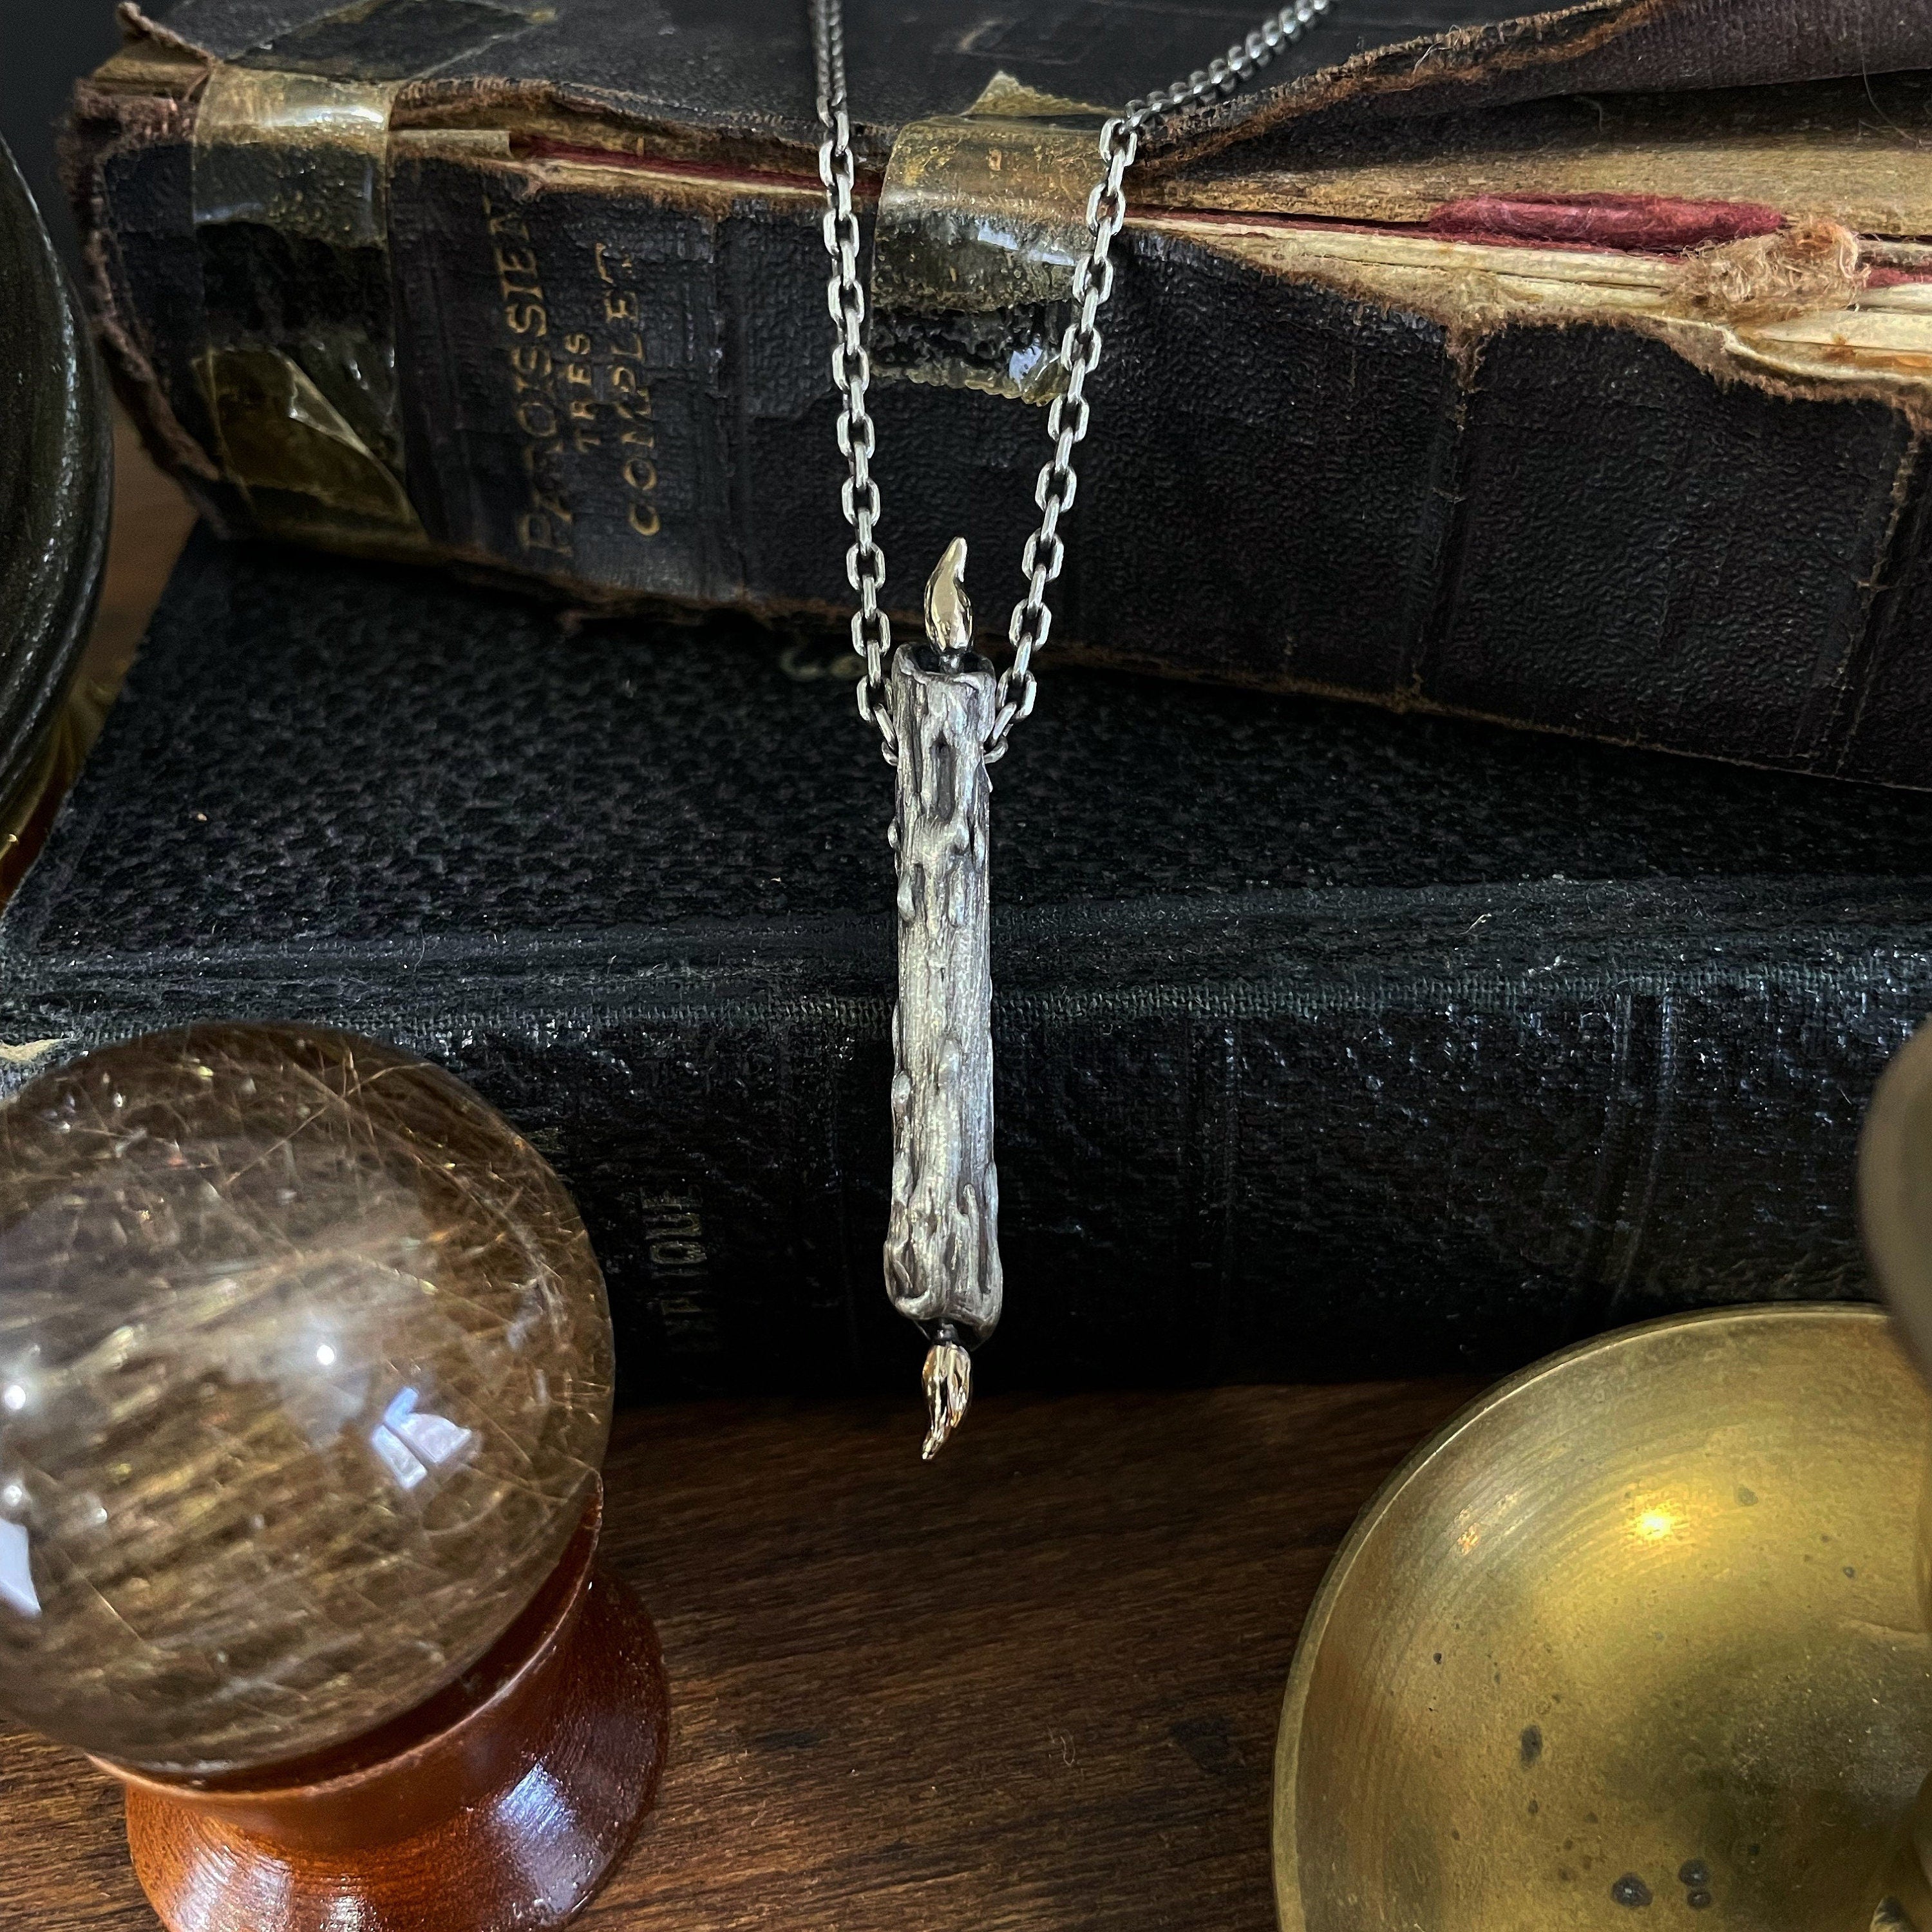 Midnight Society Pendant - Burning at Both ends Candle